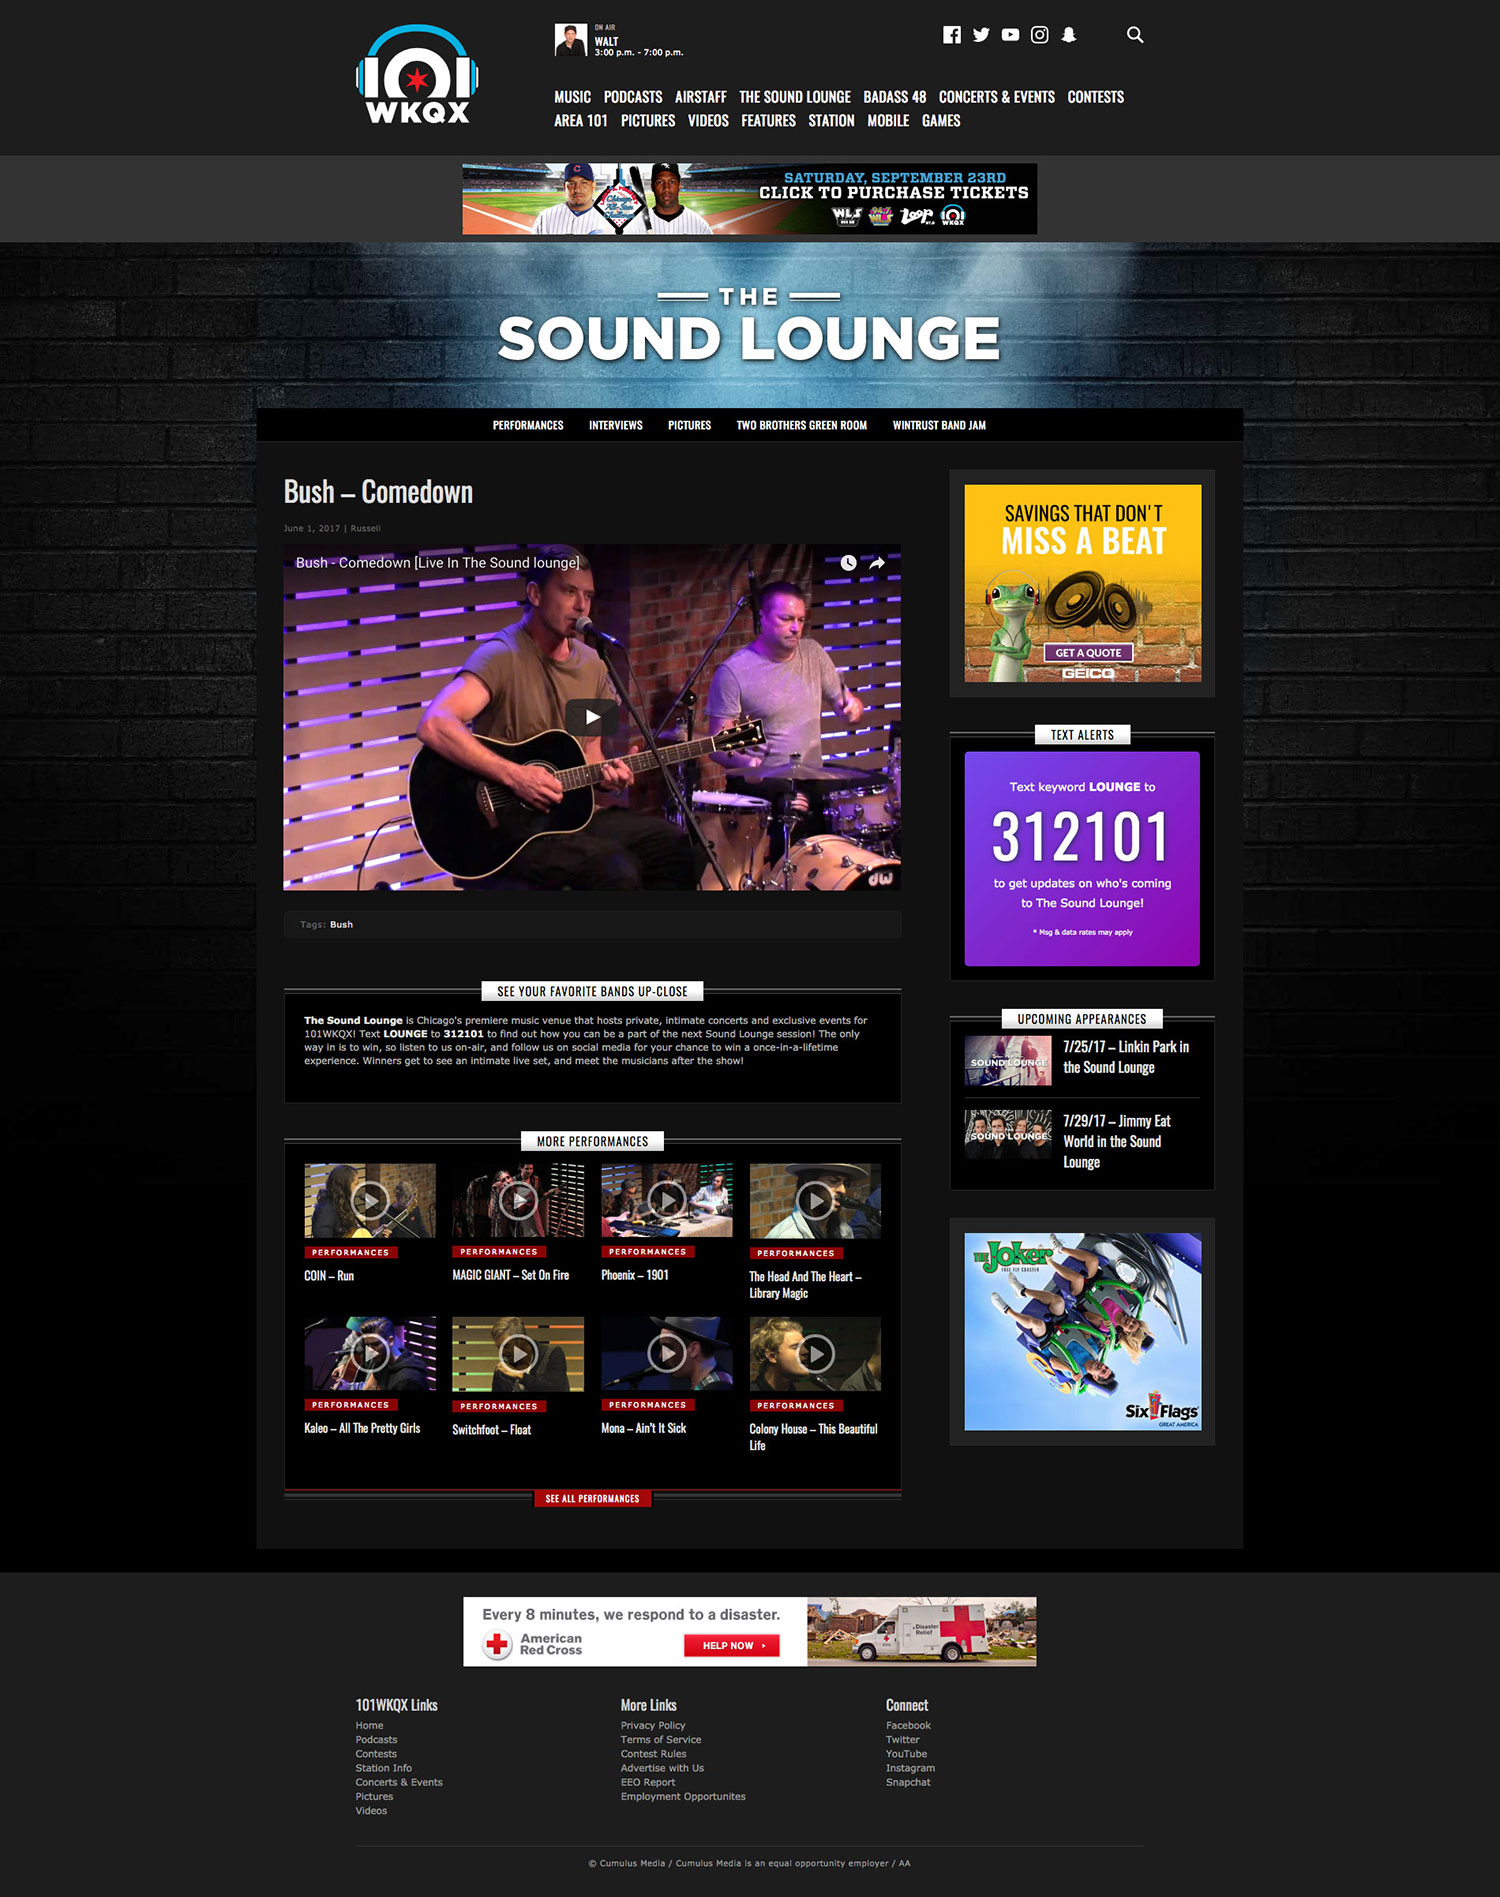 The Sound Lounge - Bush performance - Browser View